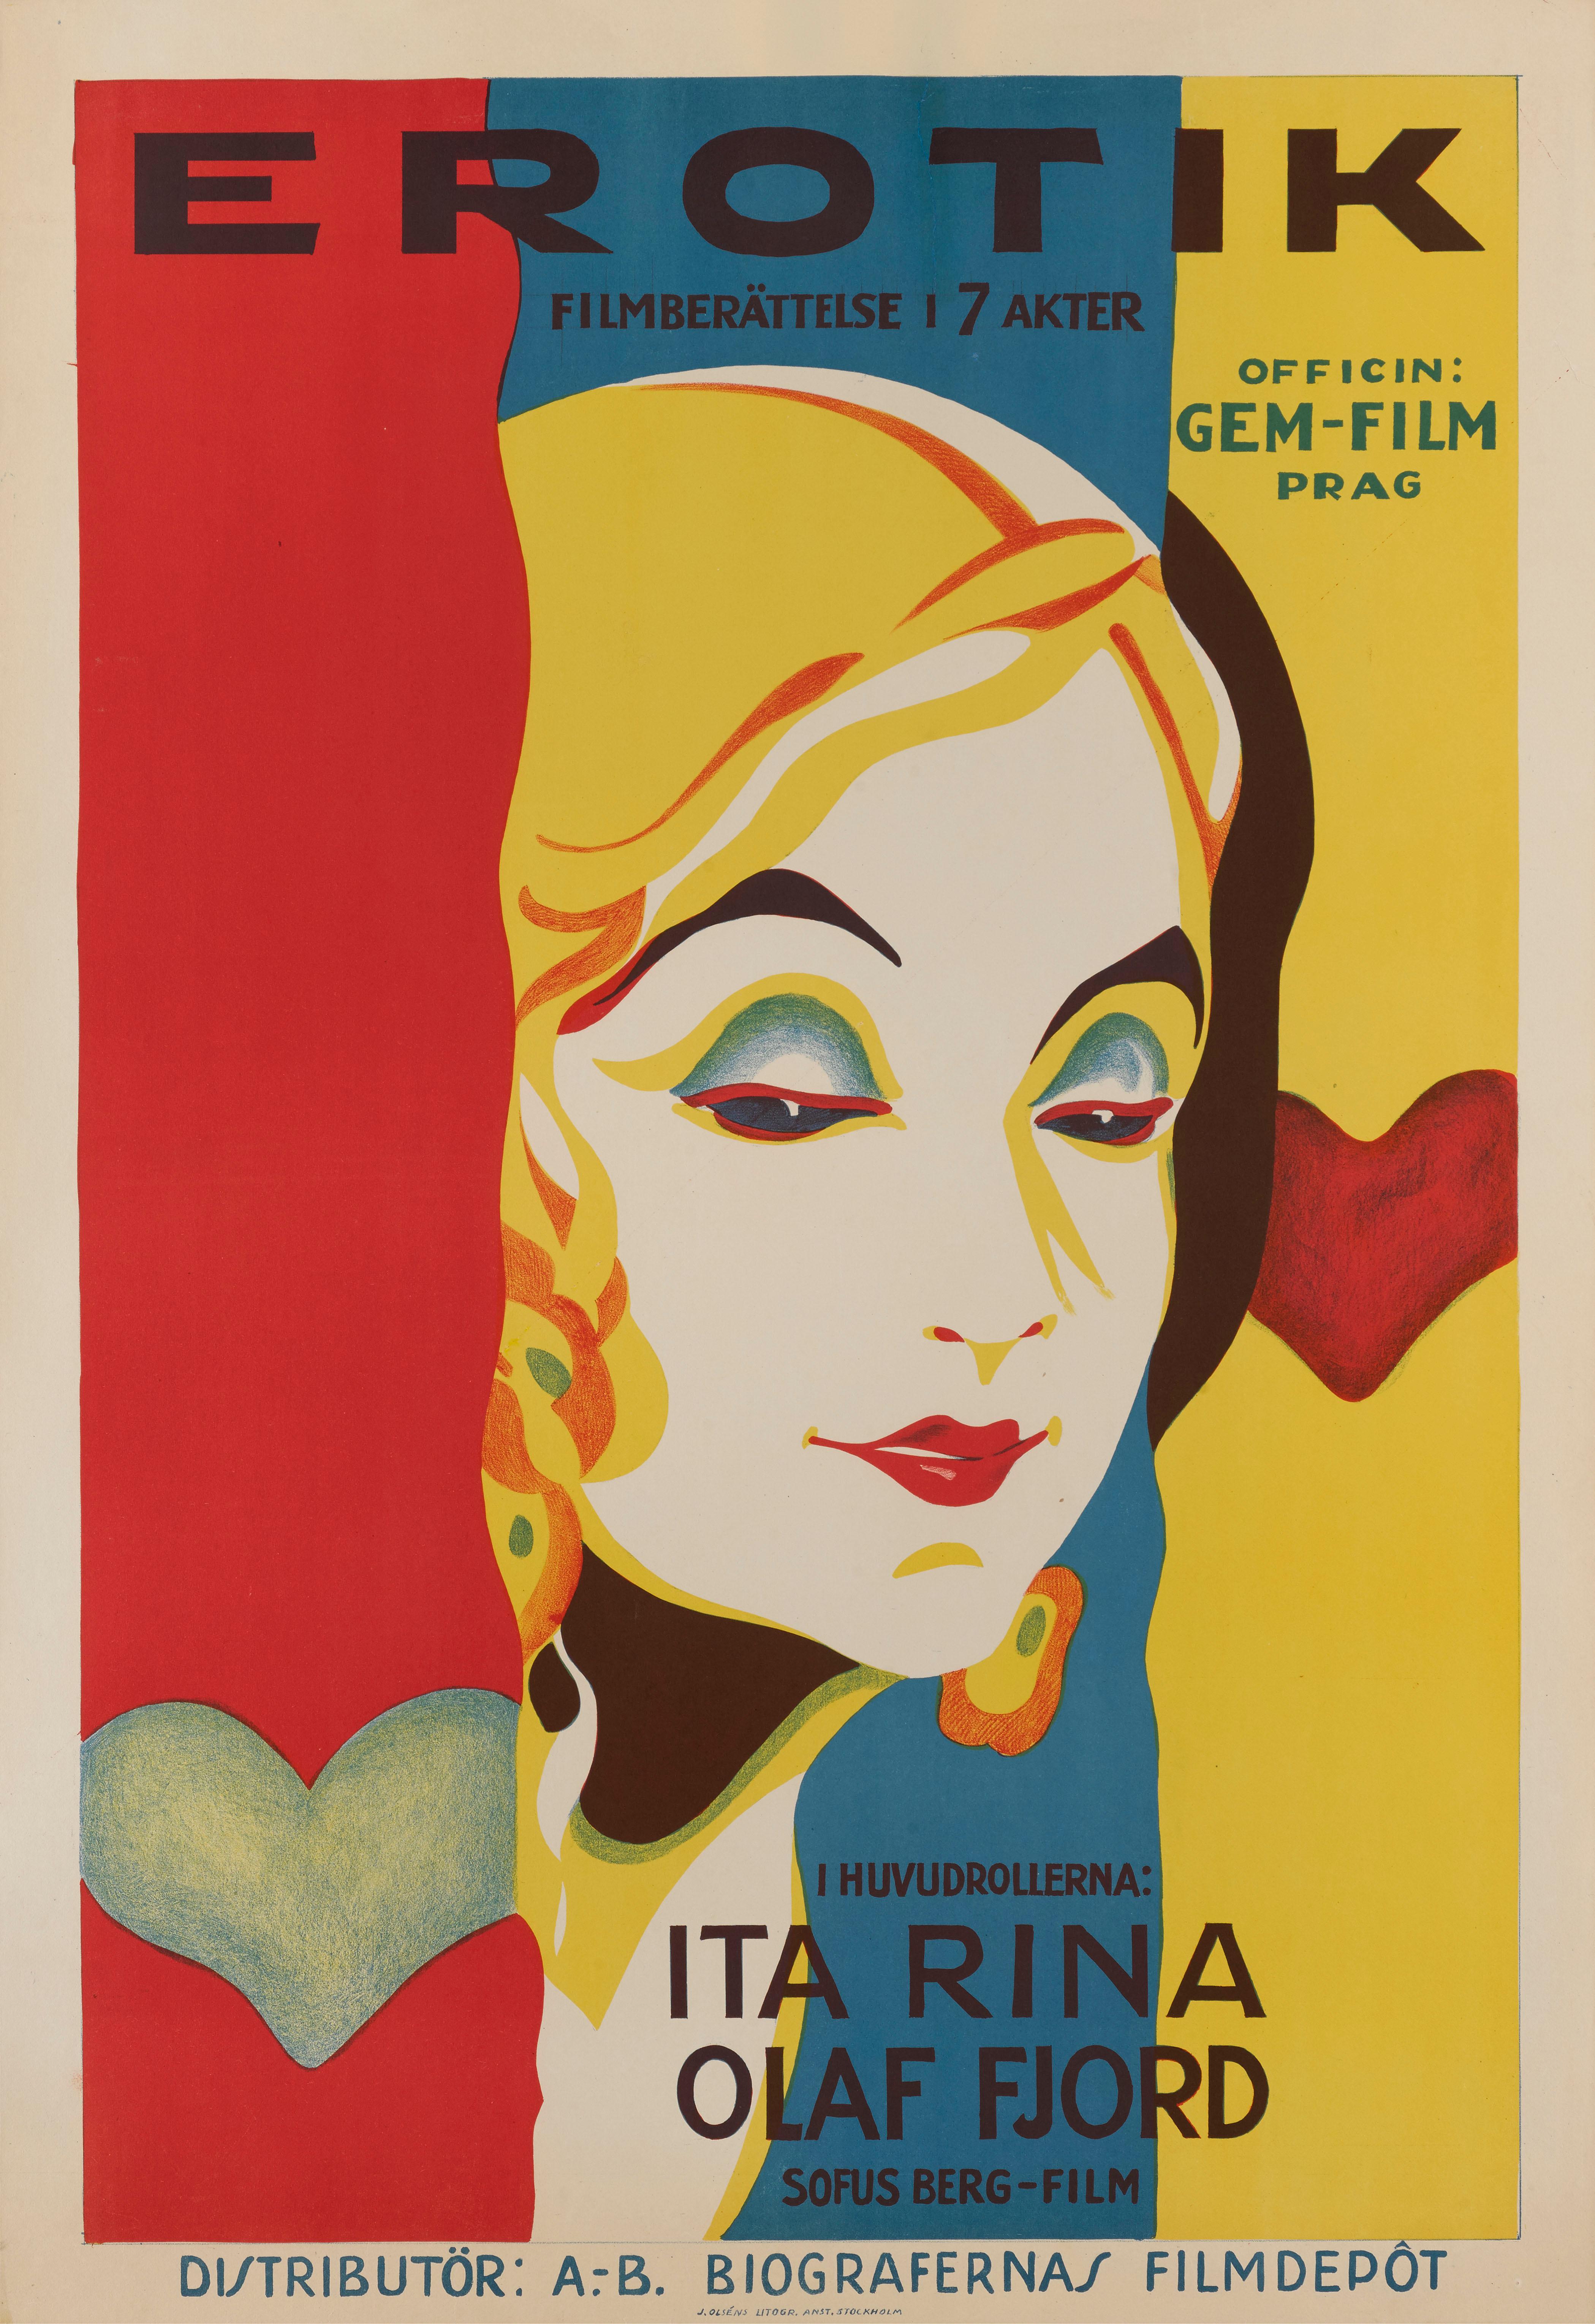 Original Swedish film poster the 1928 drama, romance Erotikon starring Ita Rina, Karel Schleichert, Olaf Fjord.
The film was directed by Gustav Machaty.
This poster was in a private Swedish collection for over thirty years, and was obtained direct